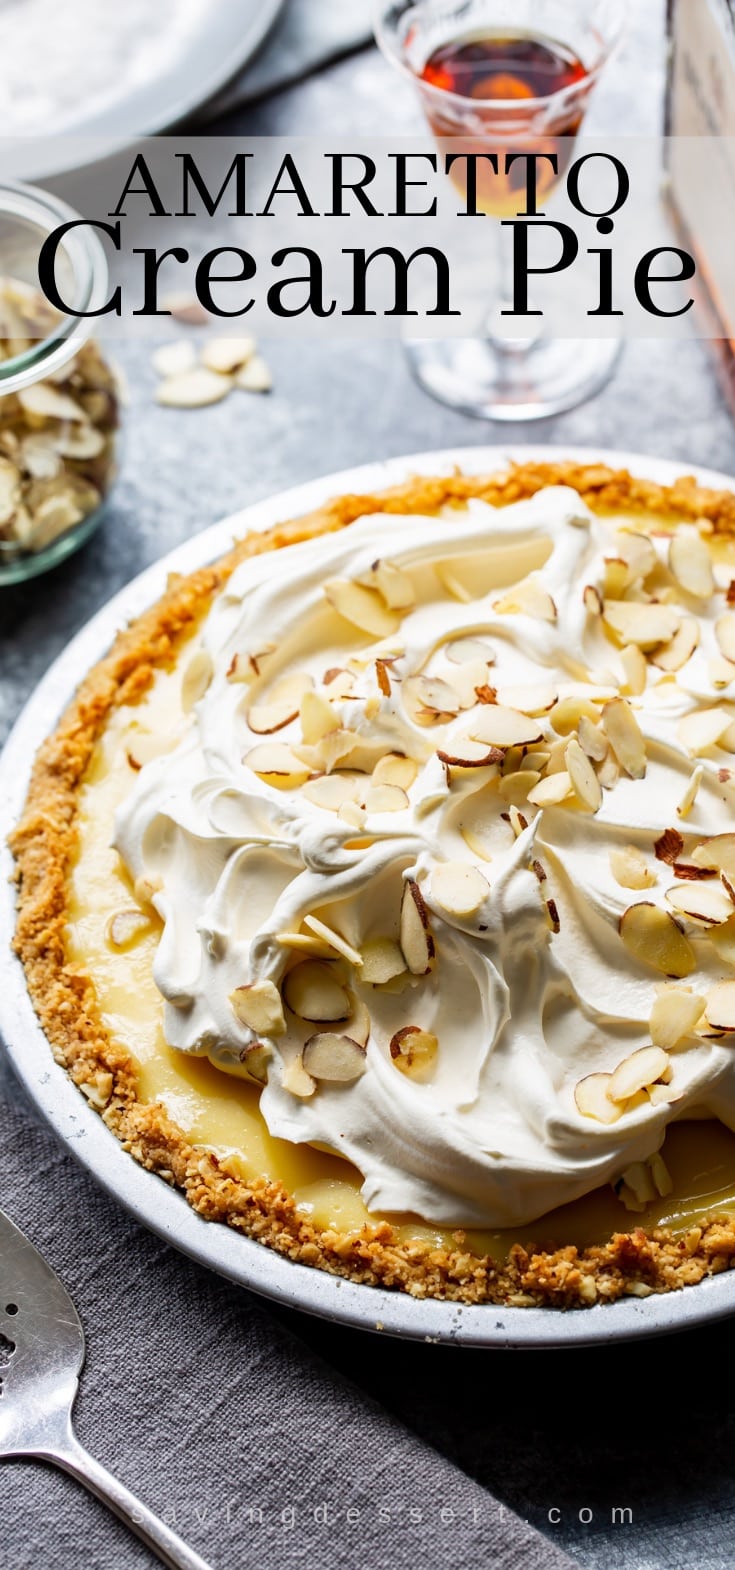 An amaretto cream pie topped with whipped cream and sliced almonds